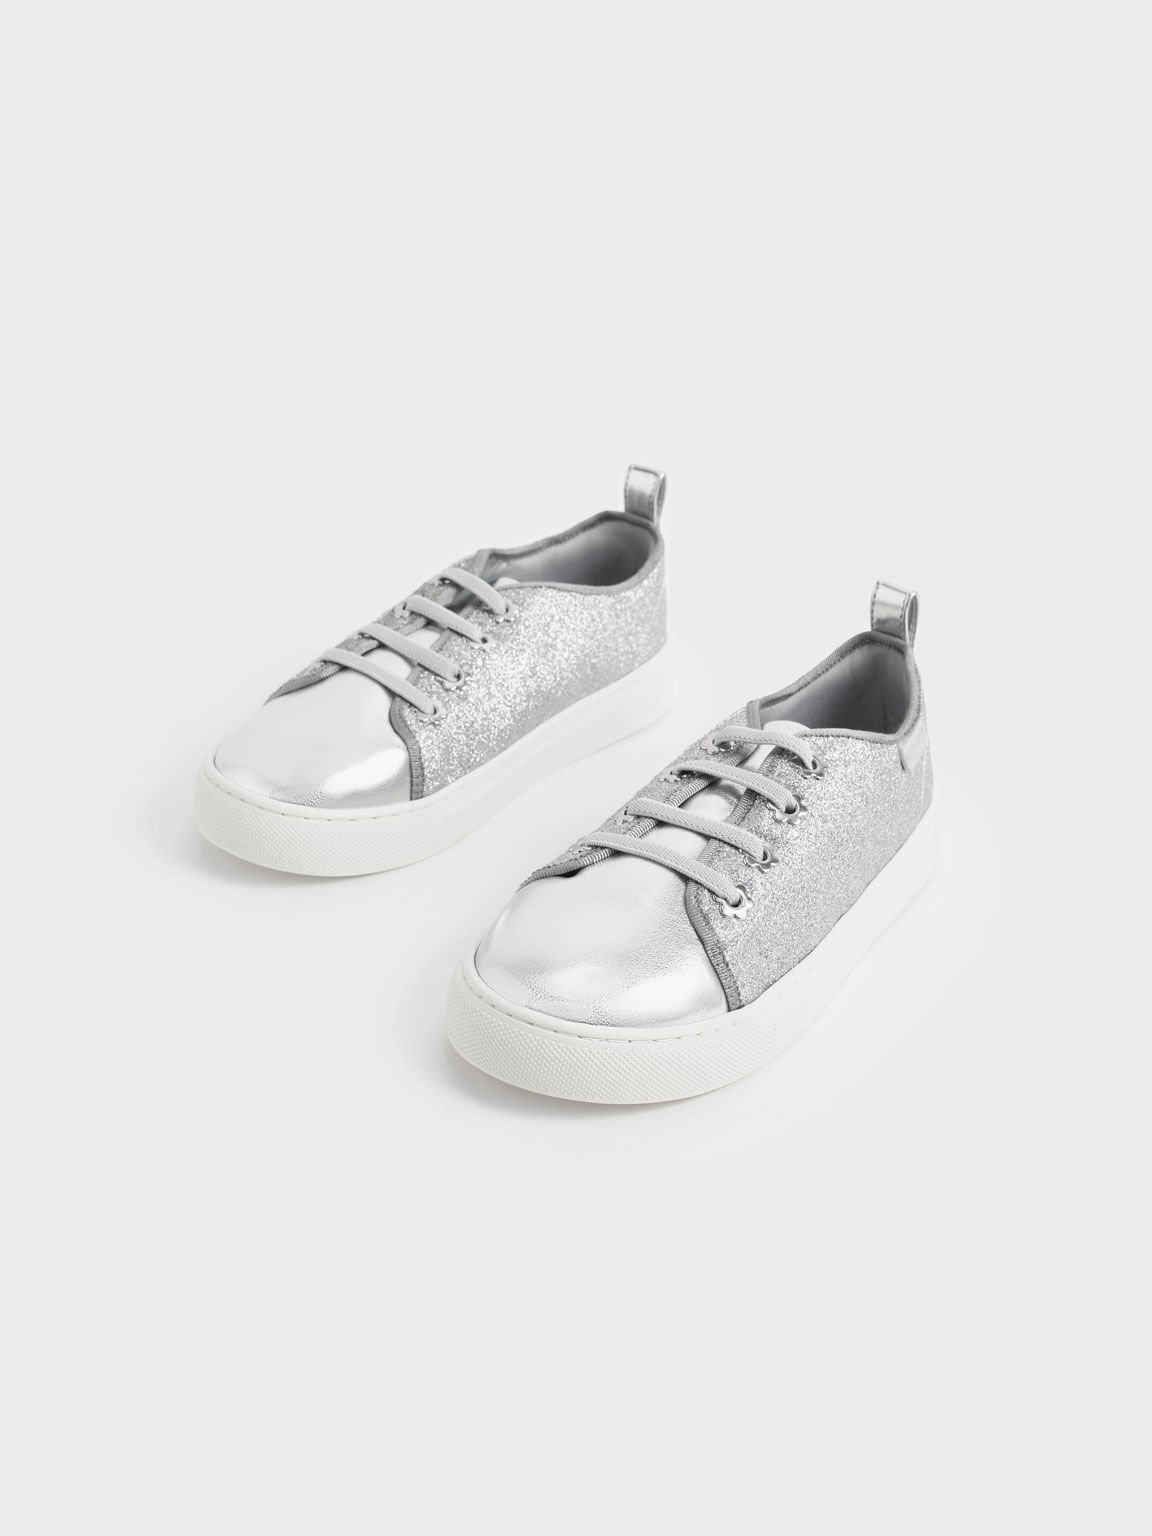 Silver Girls' Glittered Sneakers - CHARLES & KEITH UK